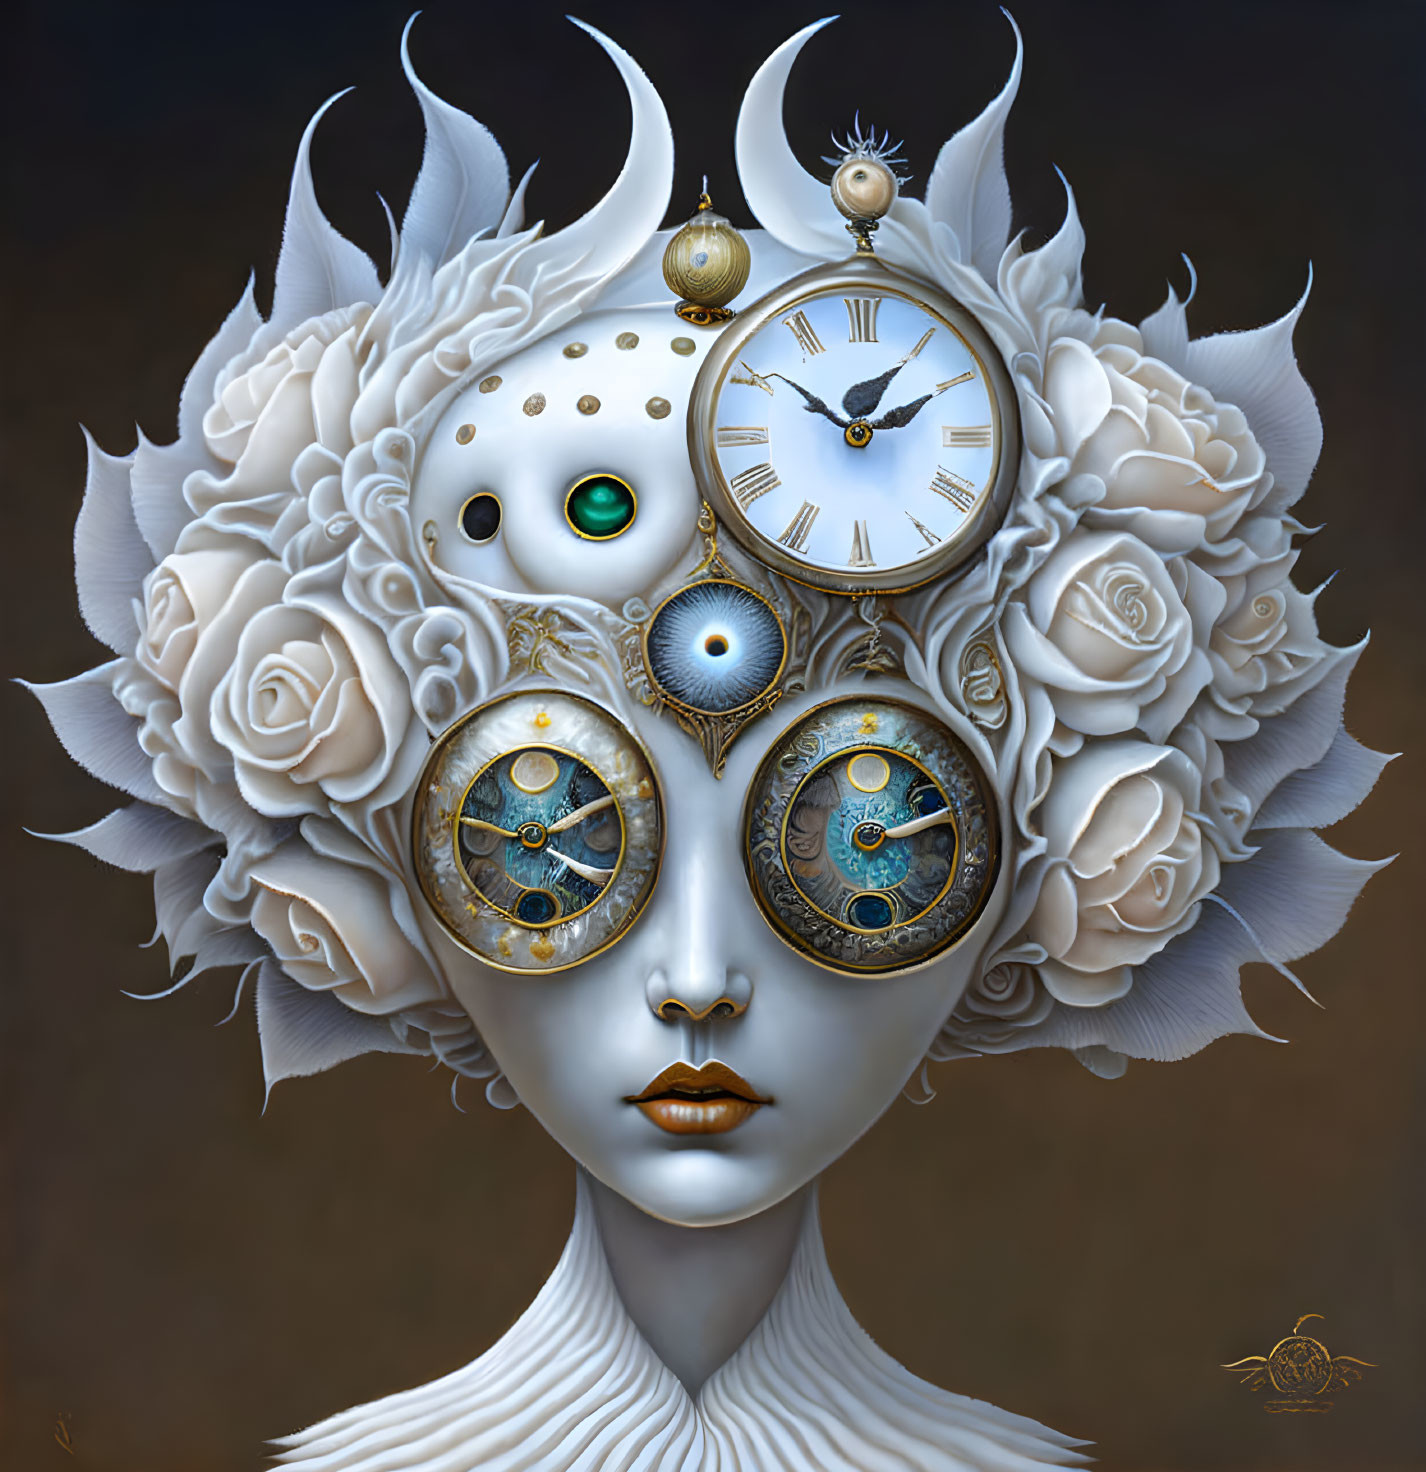 The time keeper